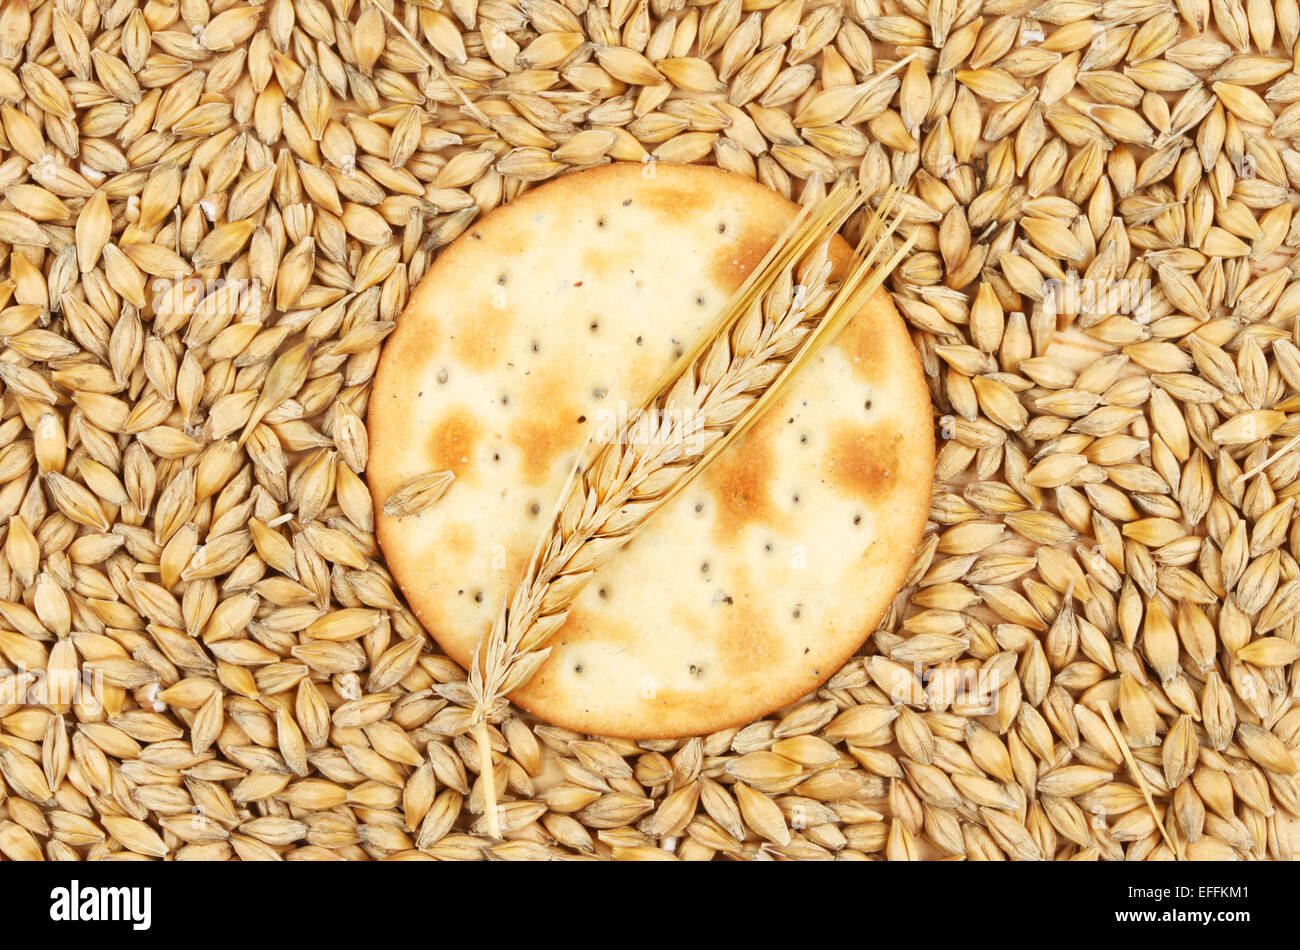 Cheese biscuit with a wheat ear surrounded by grains of wheat Stock Photo